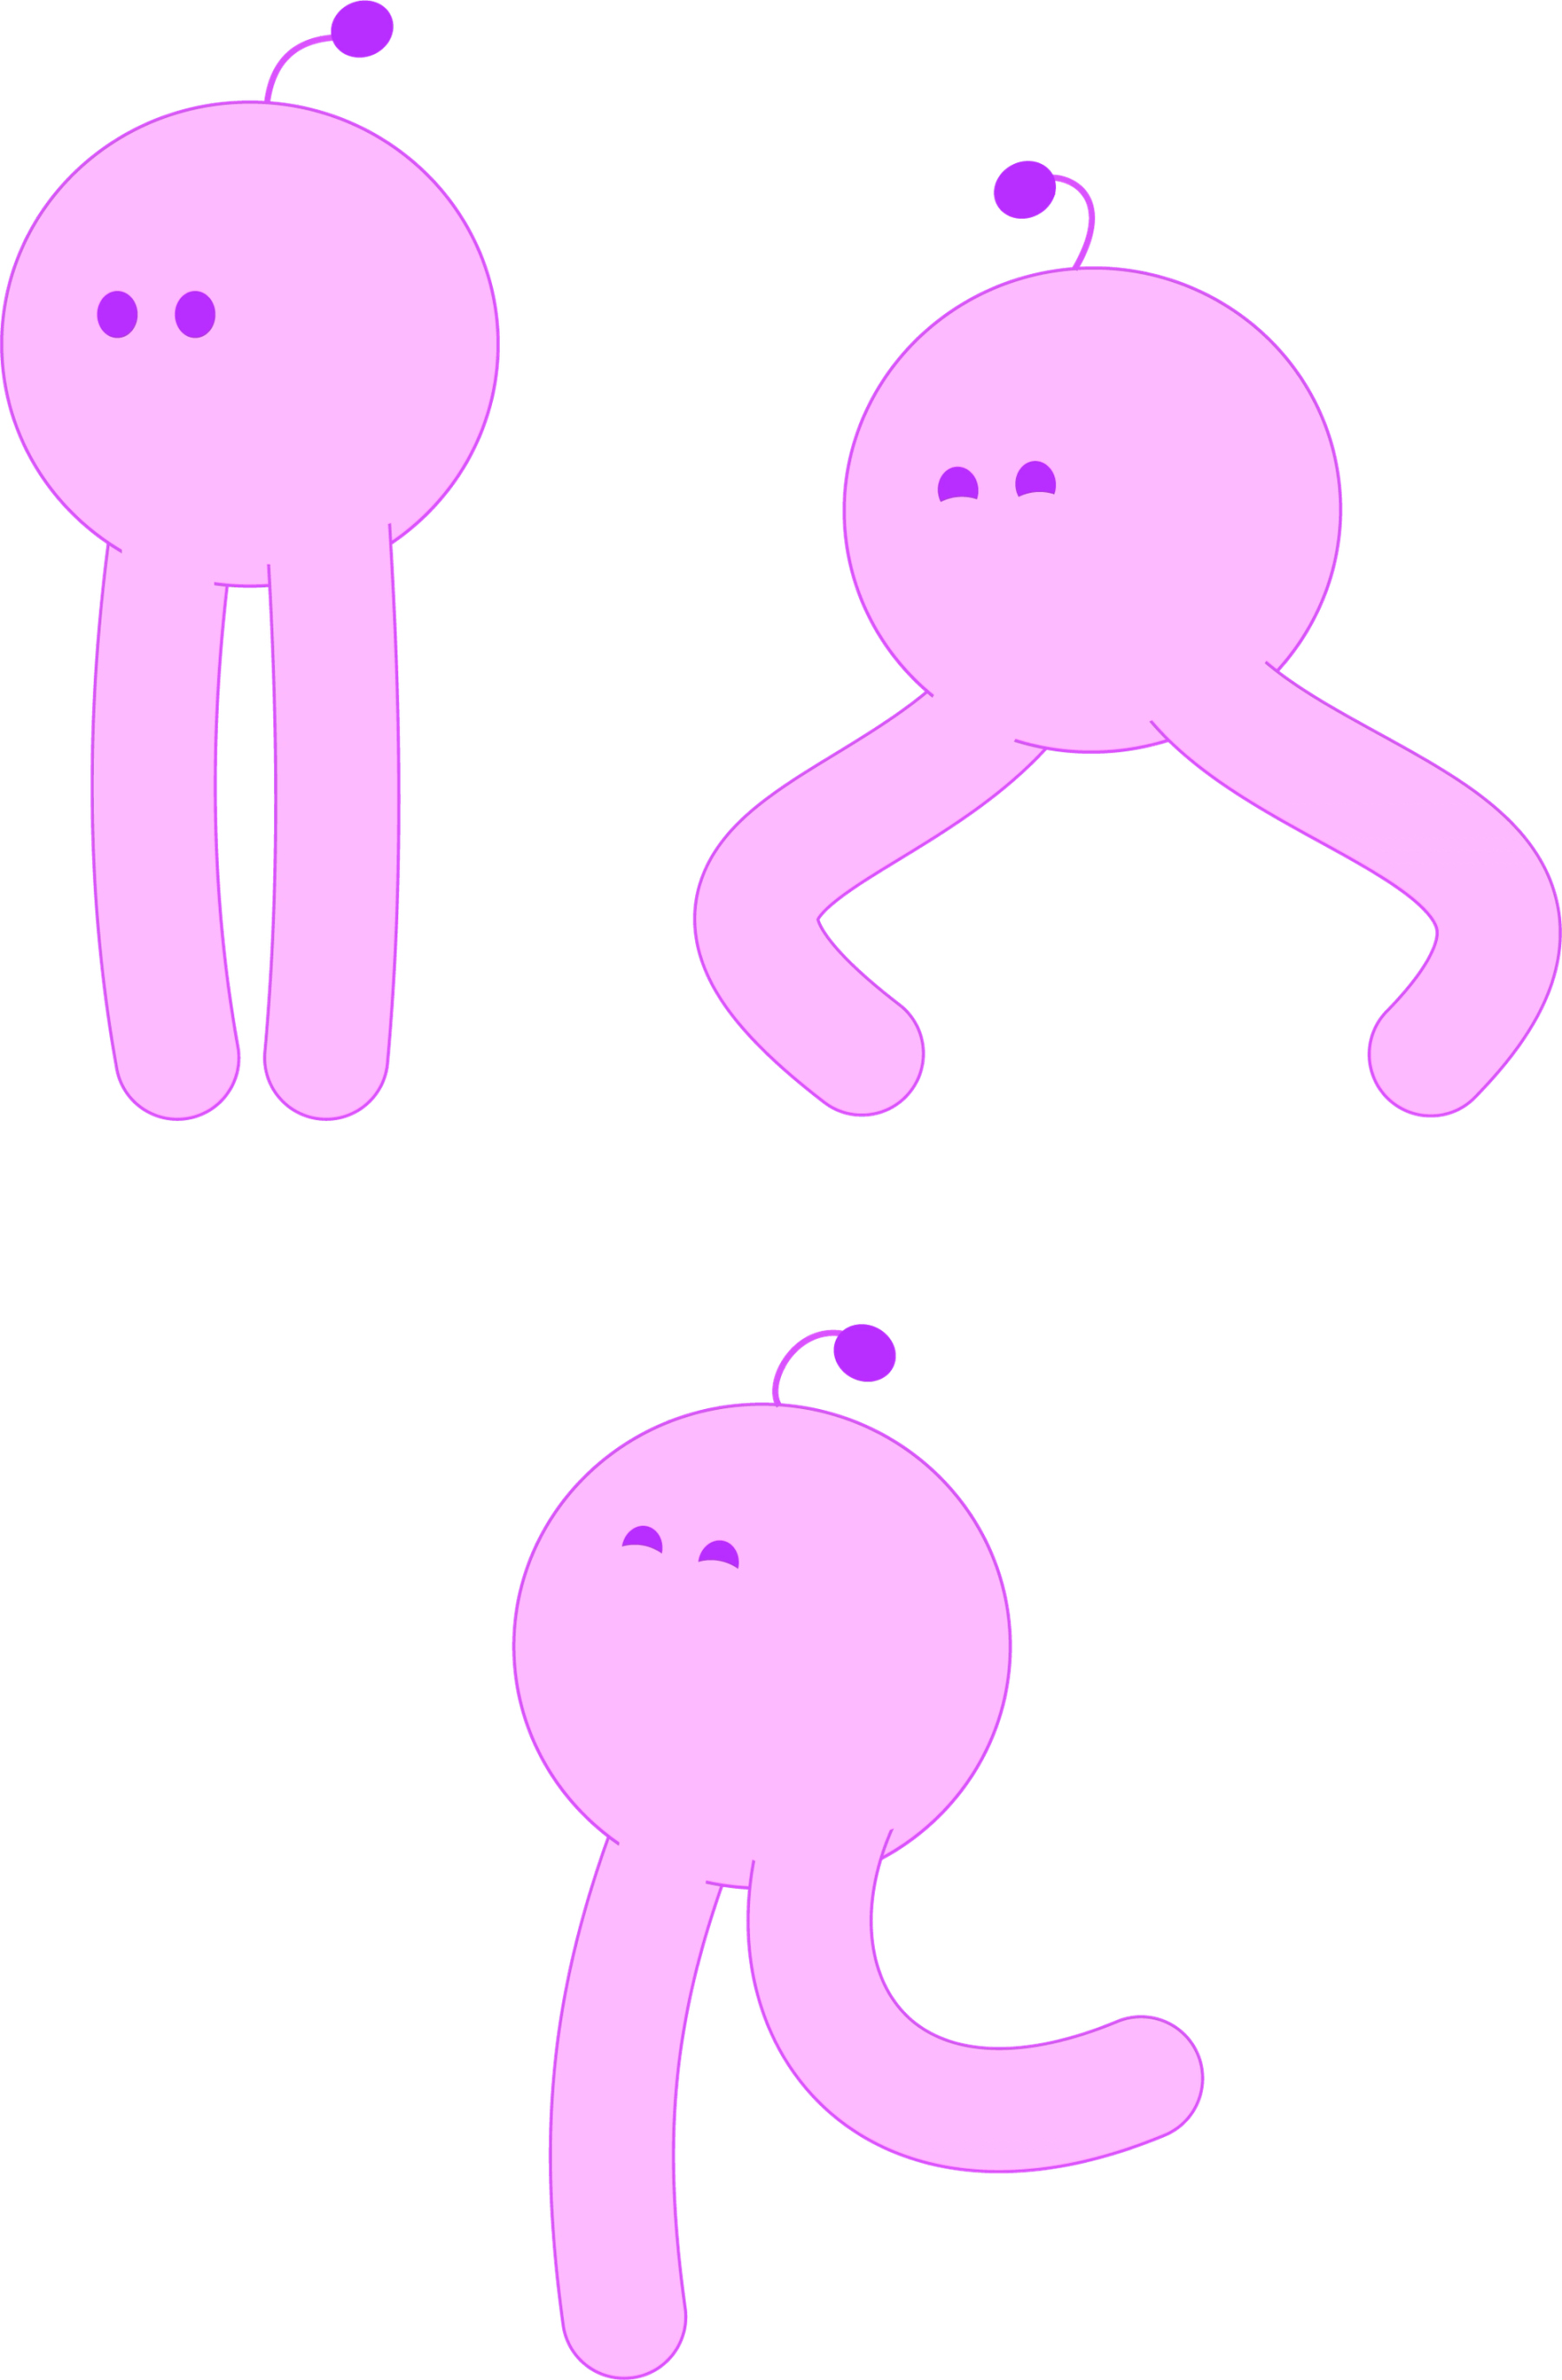 Three pink characters with an antenna, two legs, and circular heads.